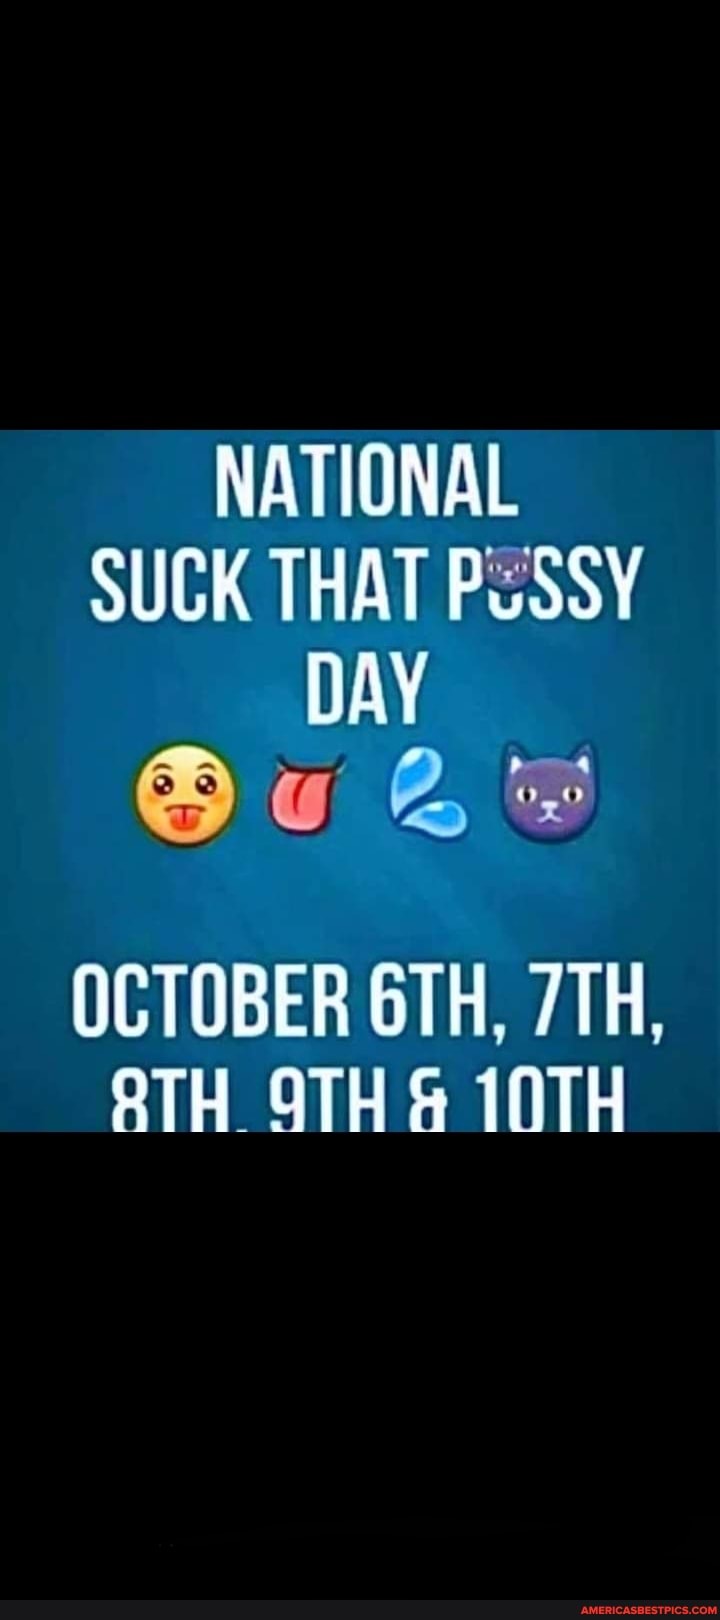 National suck pussy day